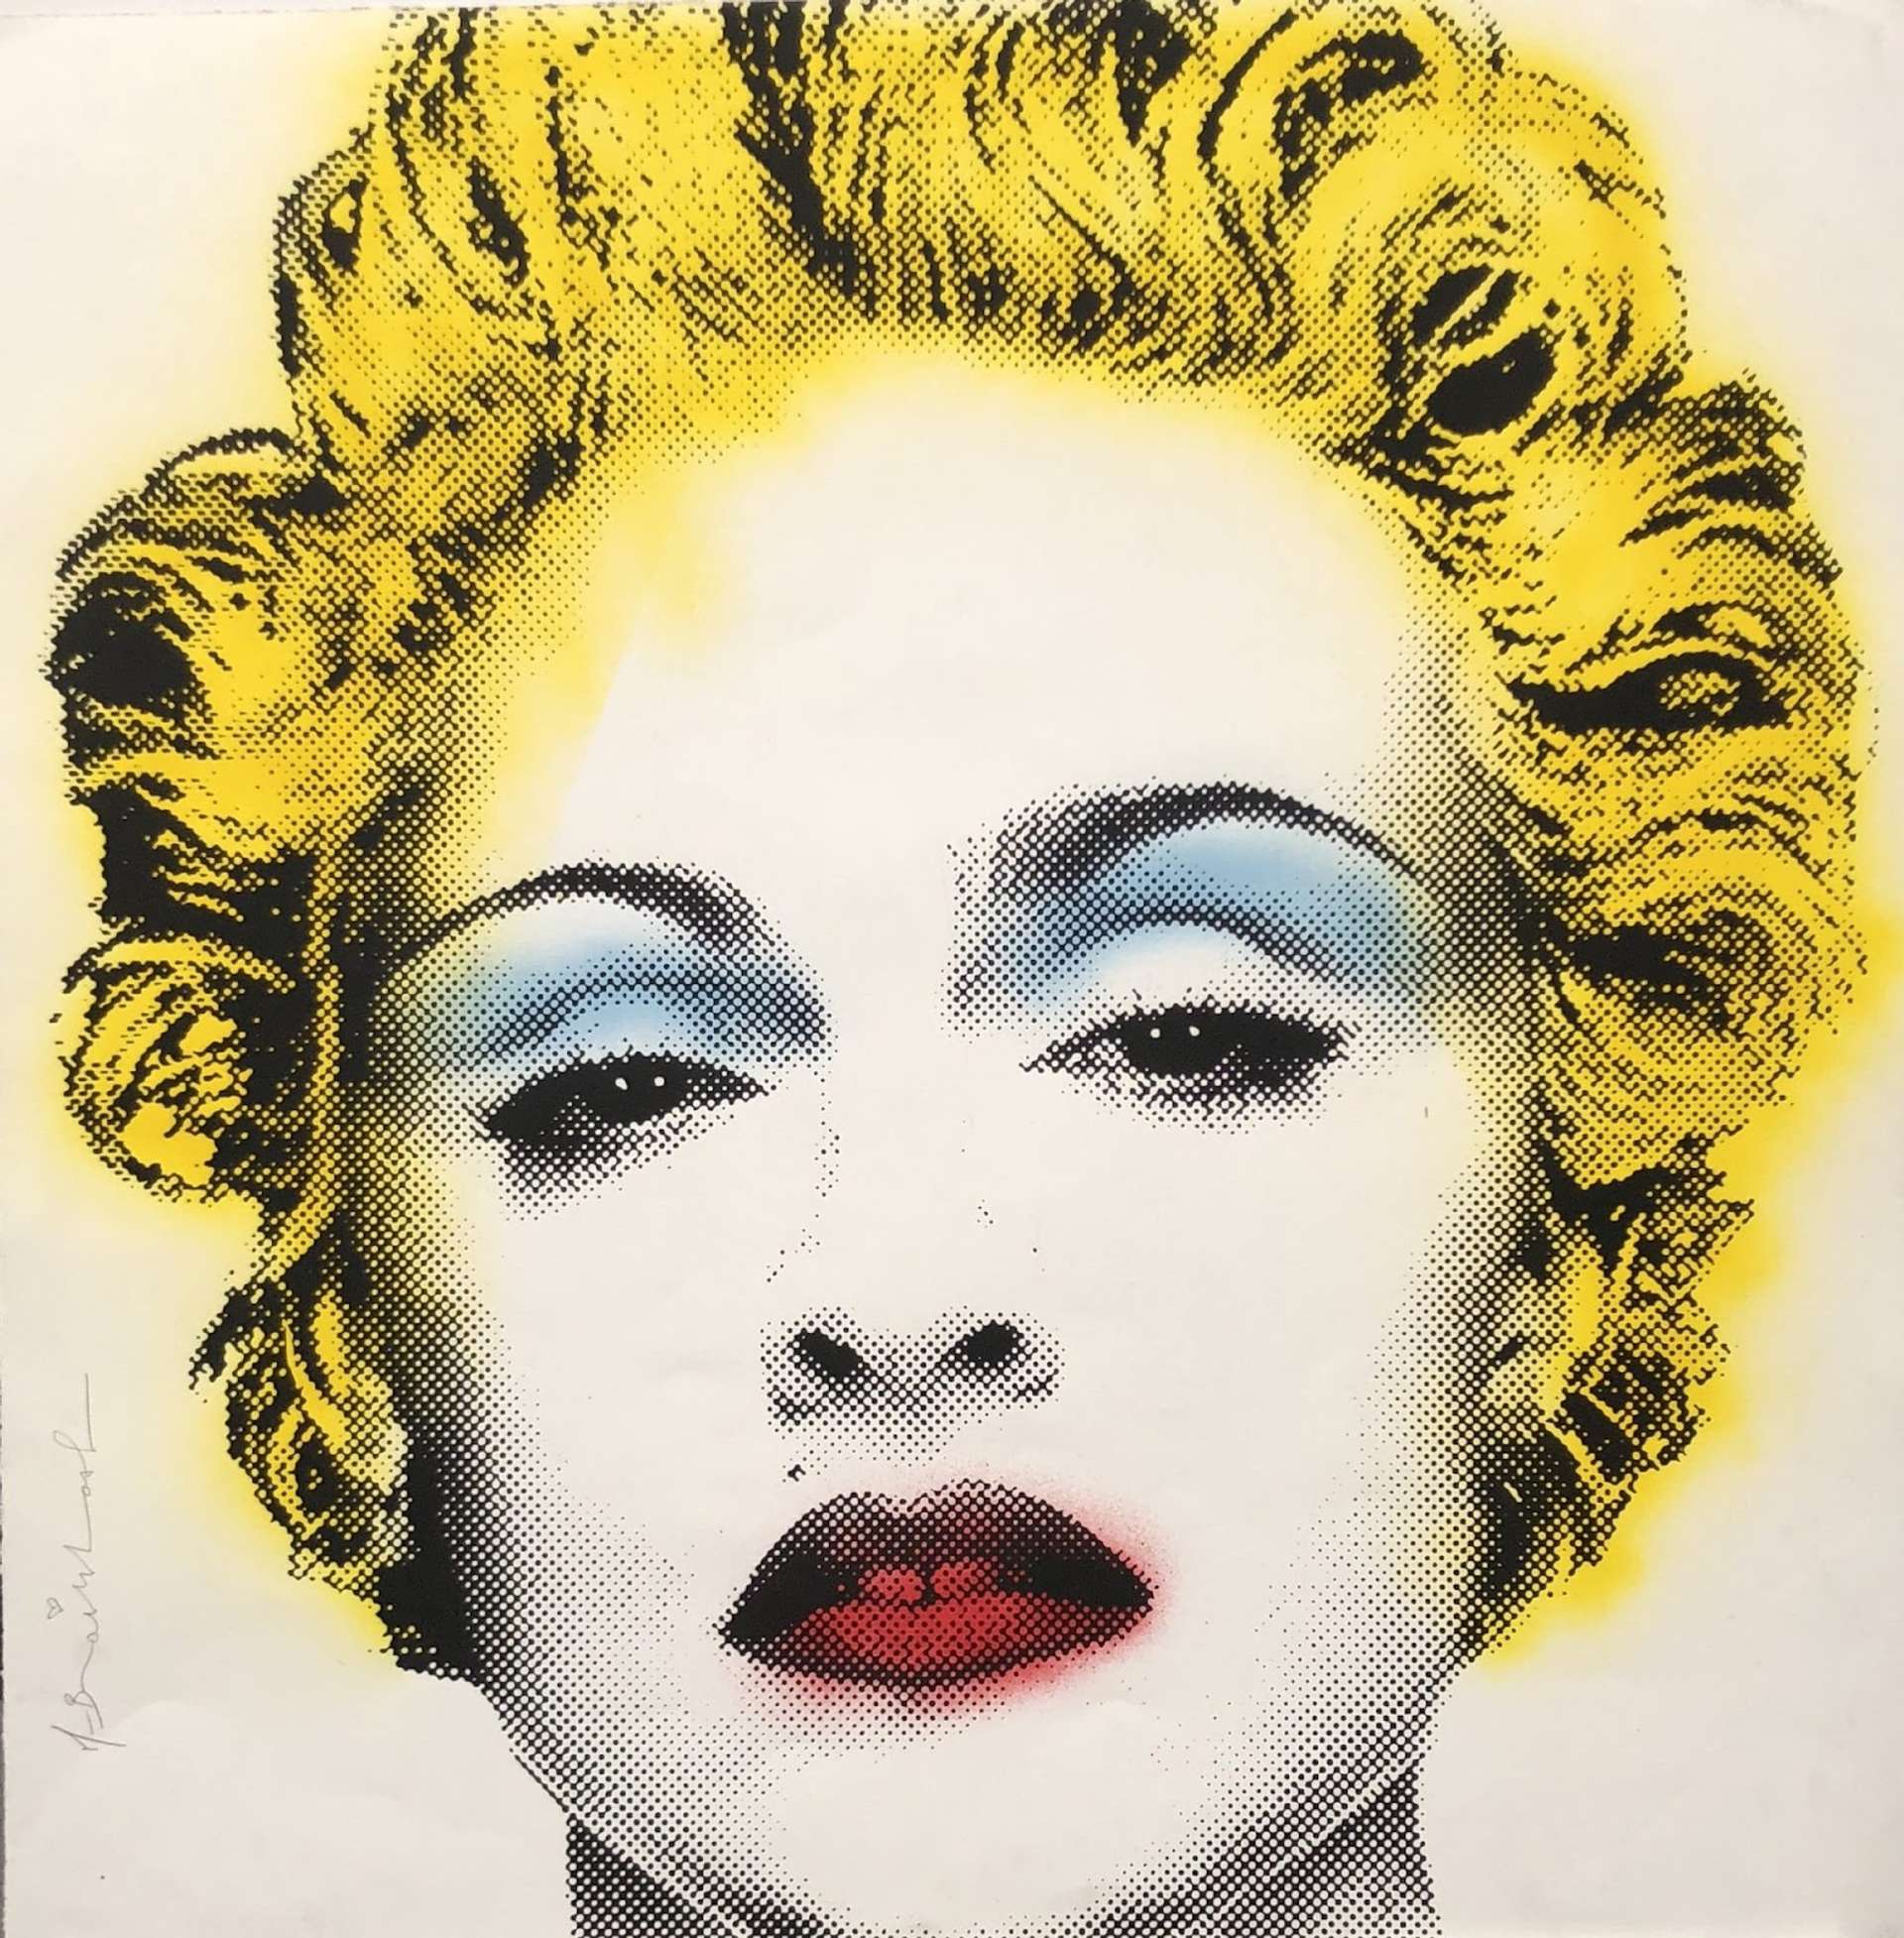 An image of the print Madonna by Mr. Brainwash, showing a graphic style close-up of the singer Madonna, stylised in a similar manner as Andy Warhol’s series of Marilyns. She is looking directly at the viewer, wearing red lipstick and blue eyeshadow and her hair is dyed bright yellow.